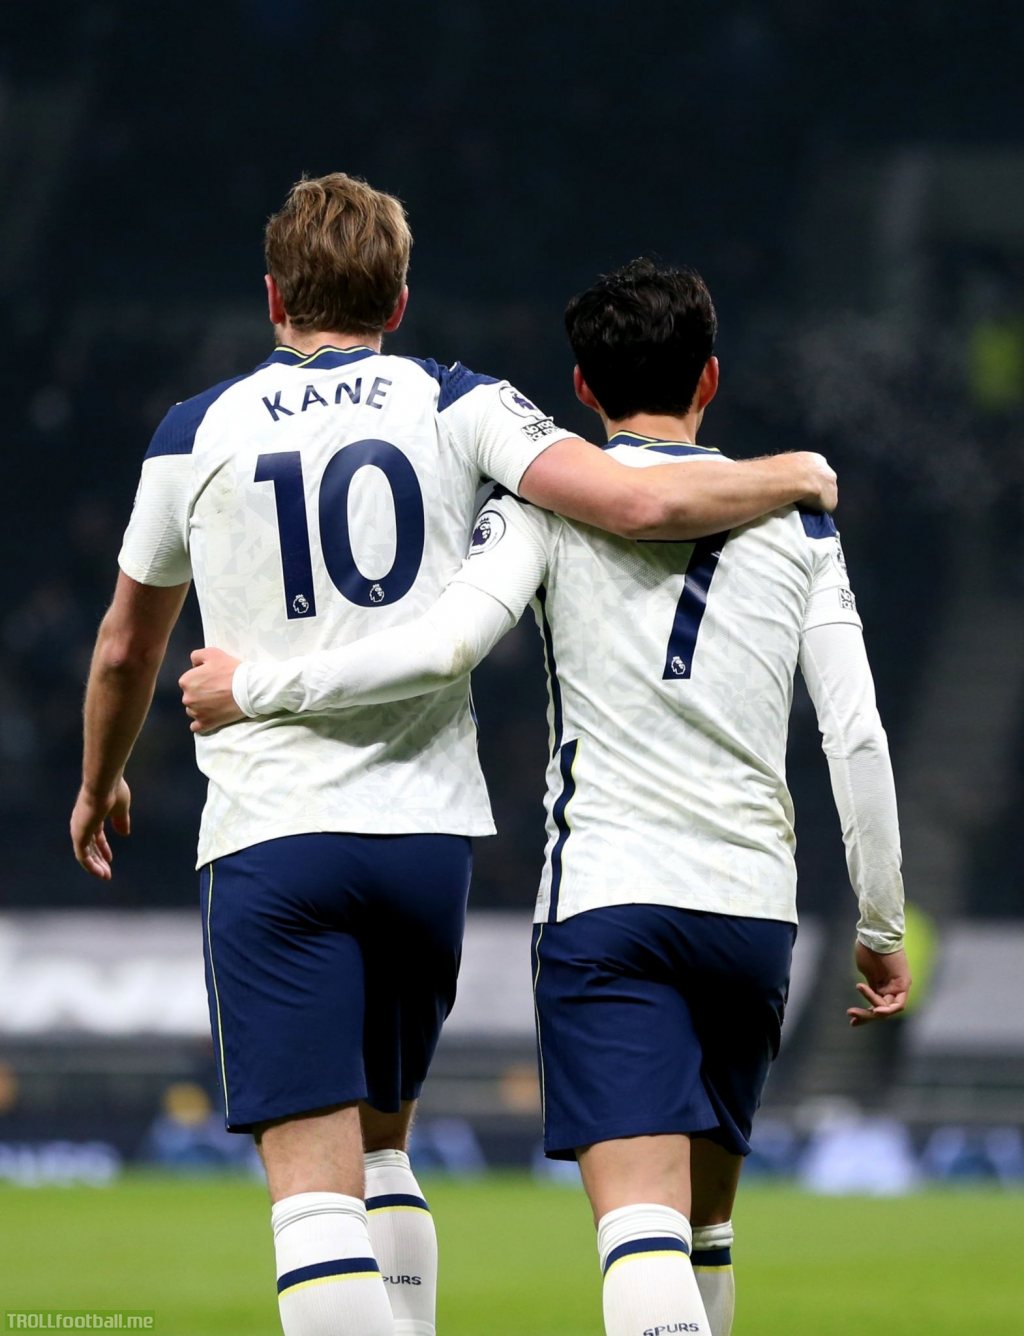 Harry Kane's 8th assist for Son Heung-Min this season now puts that combination 5th in Europe since 2009: 11 | 11/12 | Özil to Ronaldo 10 | 16/17 | Dembélé to Aubameyang 9 | 10/11 | Amalfitano to Gameiro 9 | 15/16 | Messi to Suárez 8 | 20/21 | Kane to Son 27 games left… (utdarena)